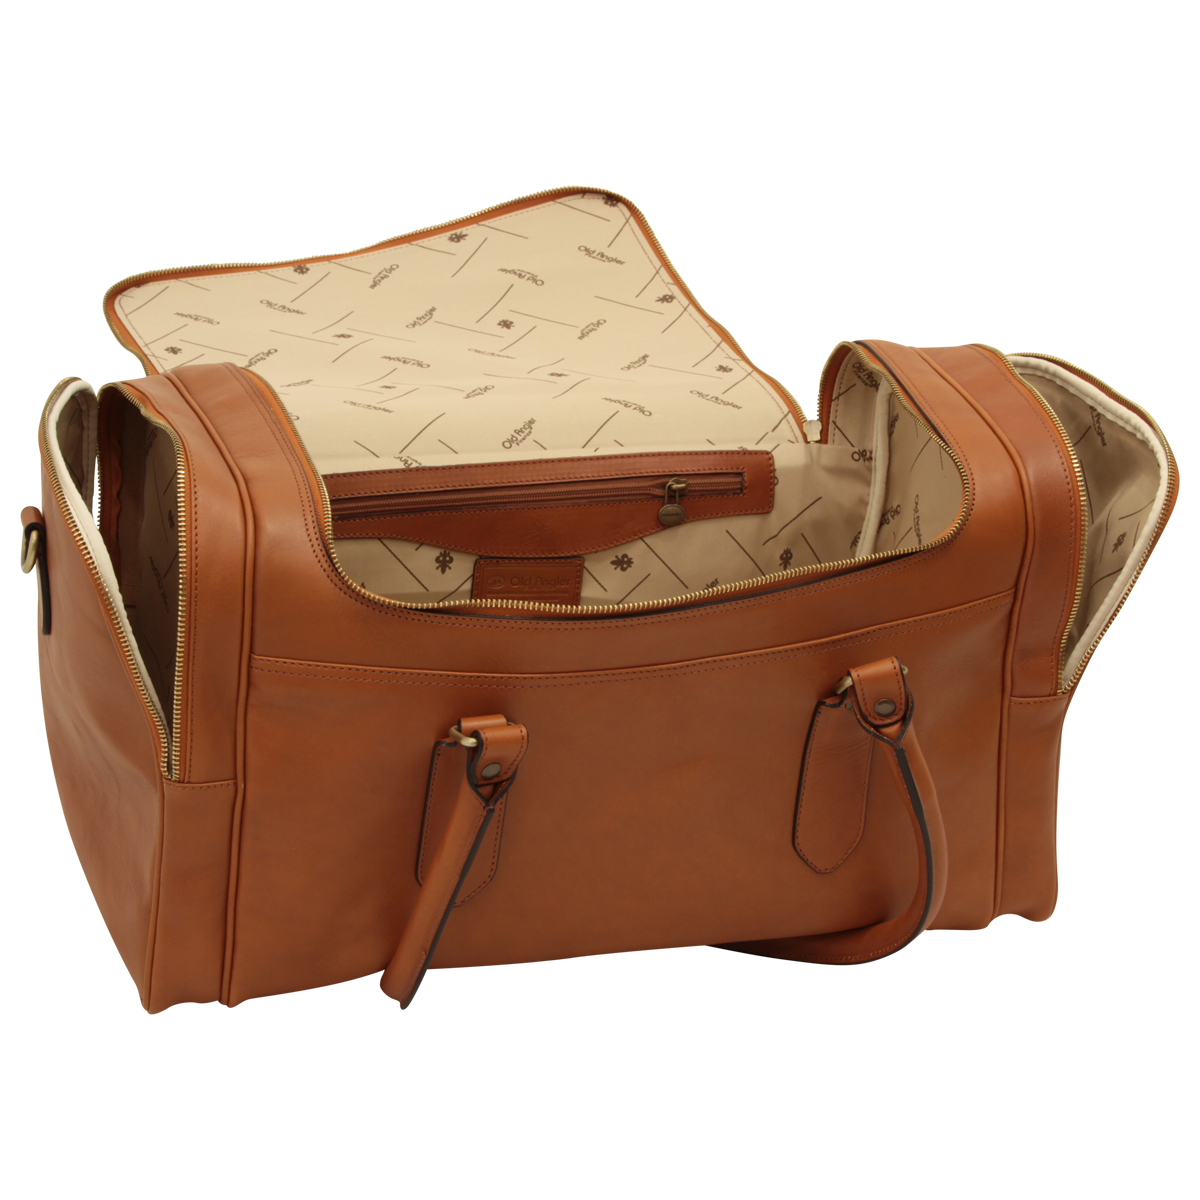 Round Metal Zip Leather Travel Bag - Brown Colonial | 077889CO US | Old Angler Firenze